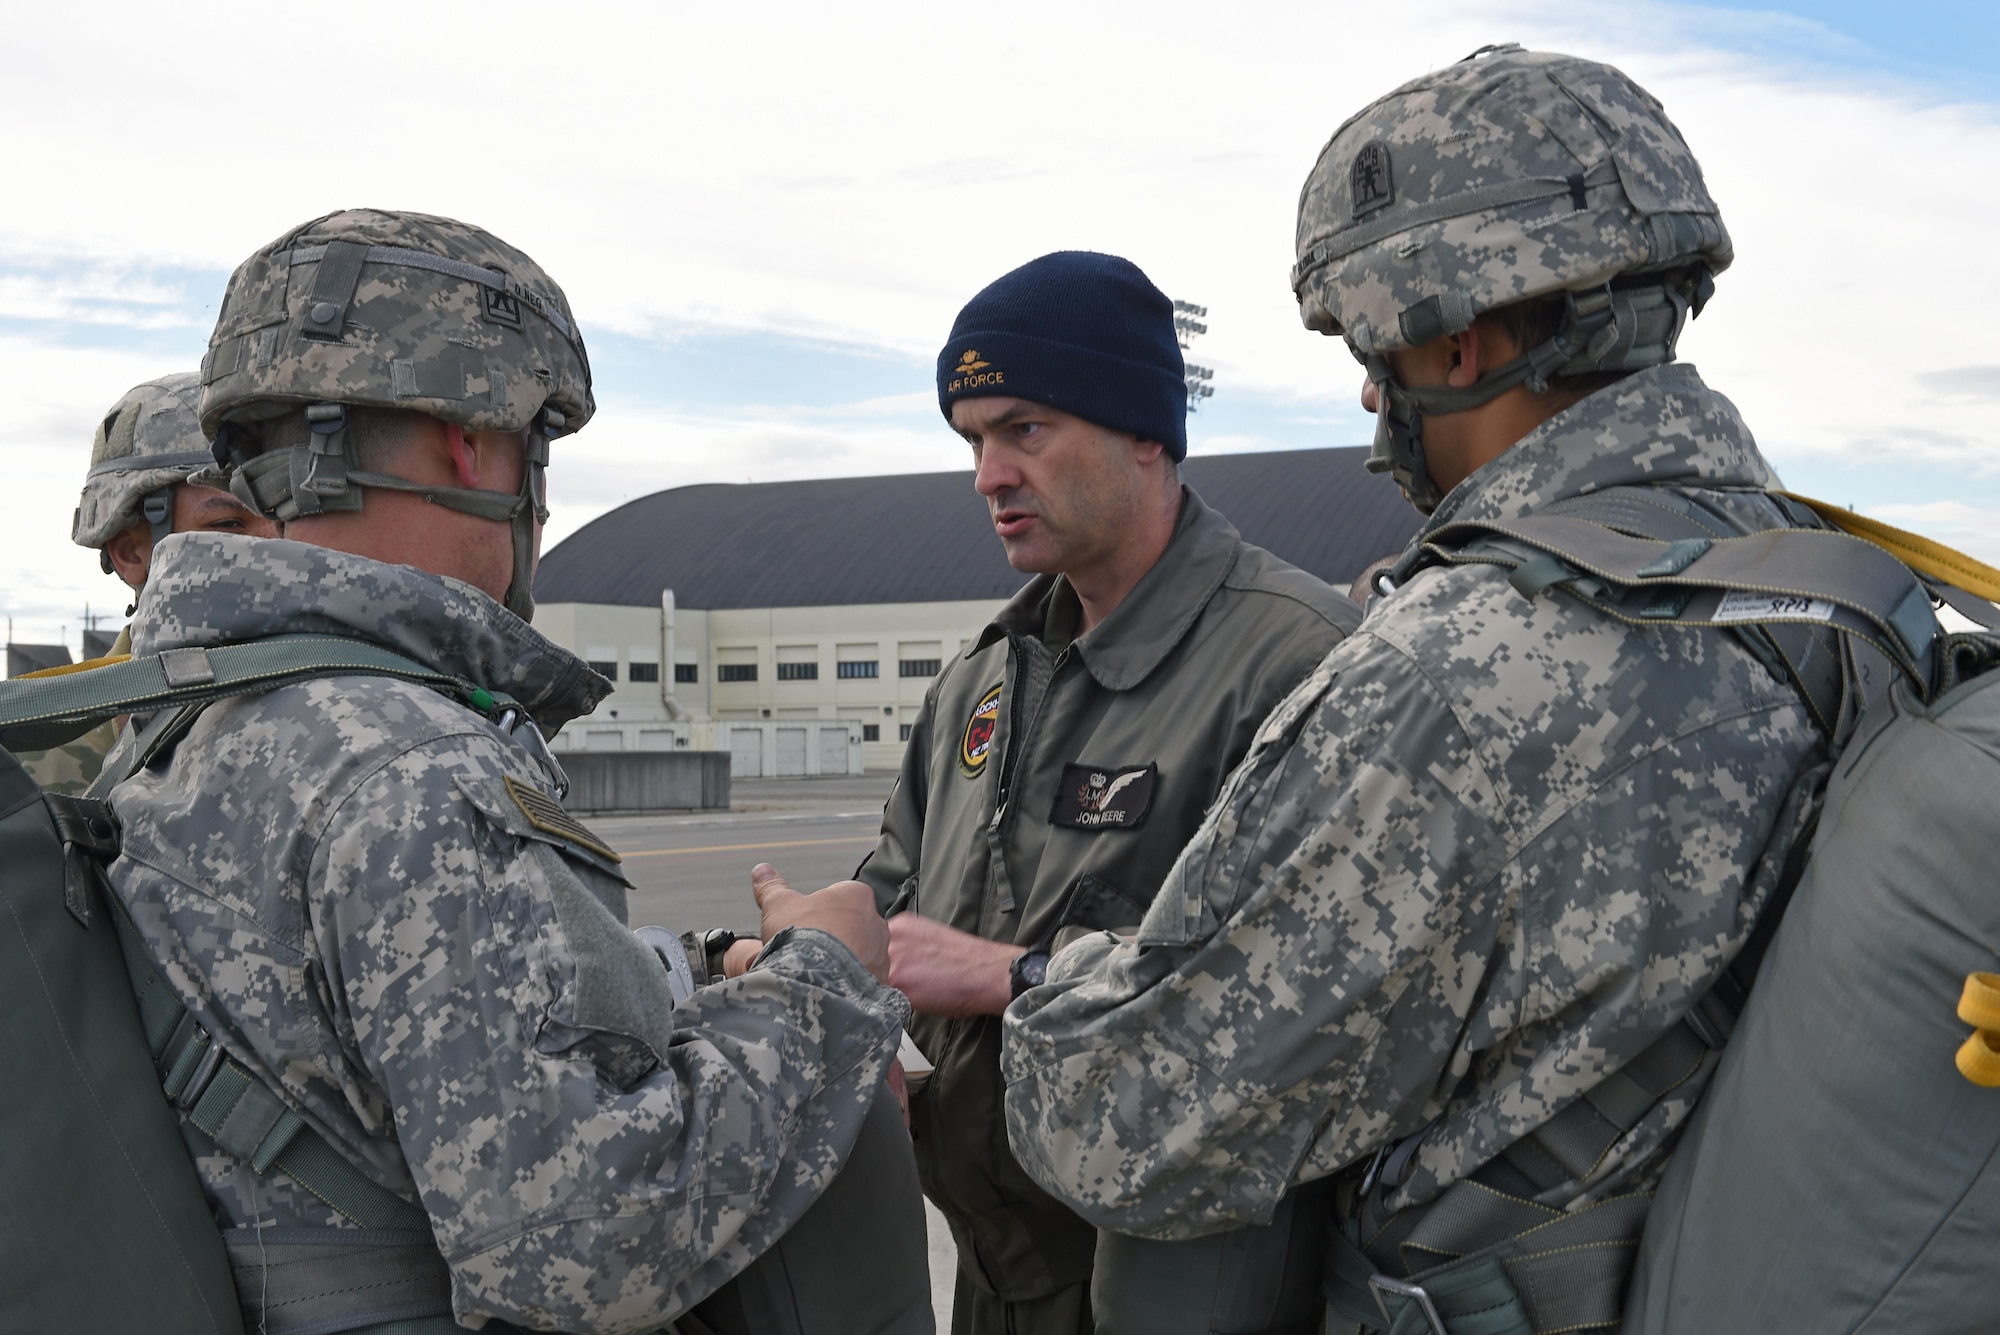 Flight Sgt. John Beere, with the Royal New Zealand Air Force’s No. 40 Squadron, briefs paratroopers assigned to the 4th Infantry Brigade Combat Team (Airborne), 25th Infantry Division, U.S. Army Alaska, prior to a jump during Red-Flag Alaska 17-1 at Joint Base Elmendorf-Richardson, Alaska, Oct. 12, 2016. Red Flag-Alaska exercises are focused on improving the combat readiness of U.S. and international forces and providing training for units preparing for Air Expeditionary Force taskings. 